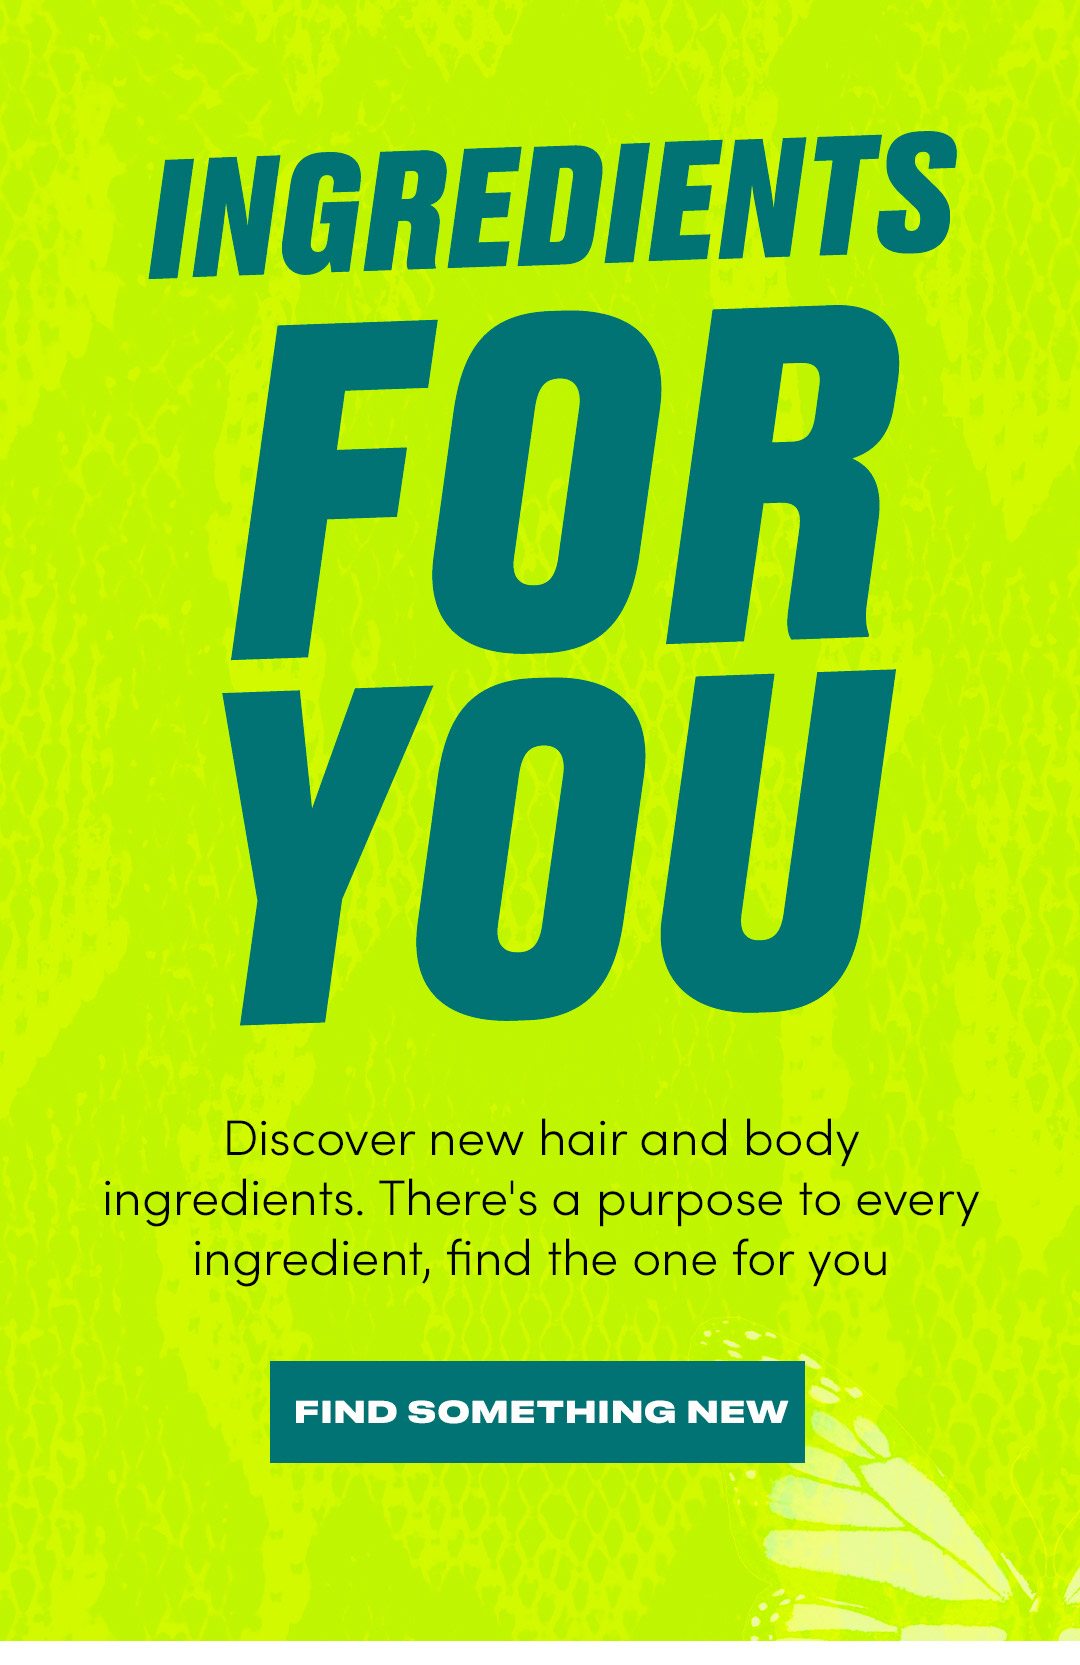 INGREDIENTS HAIR AND BODY